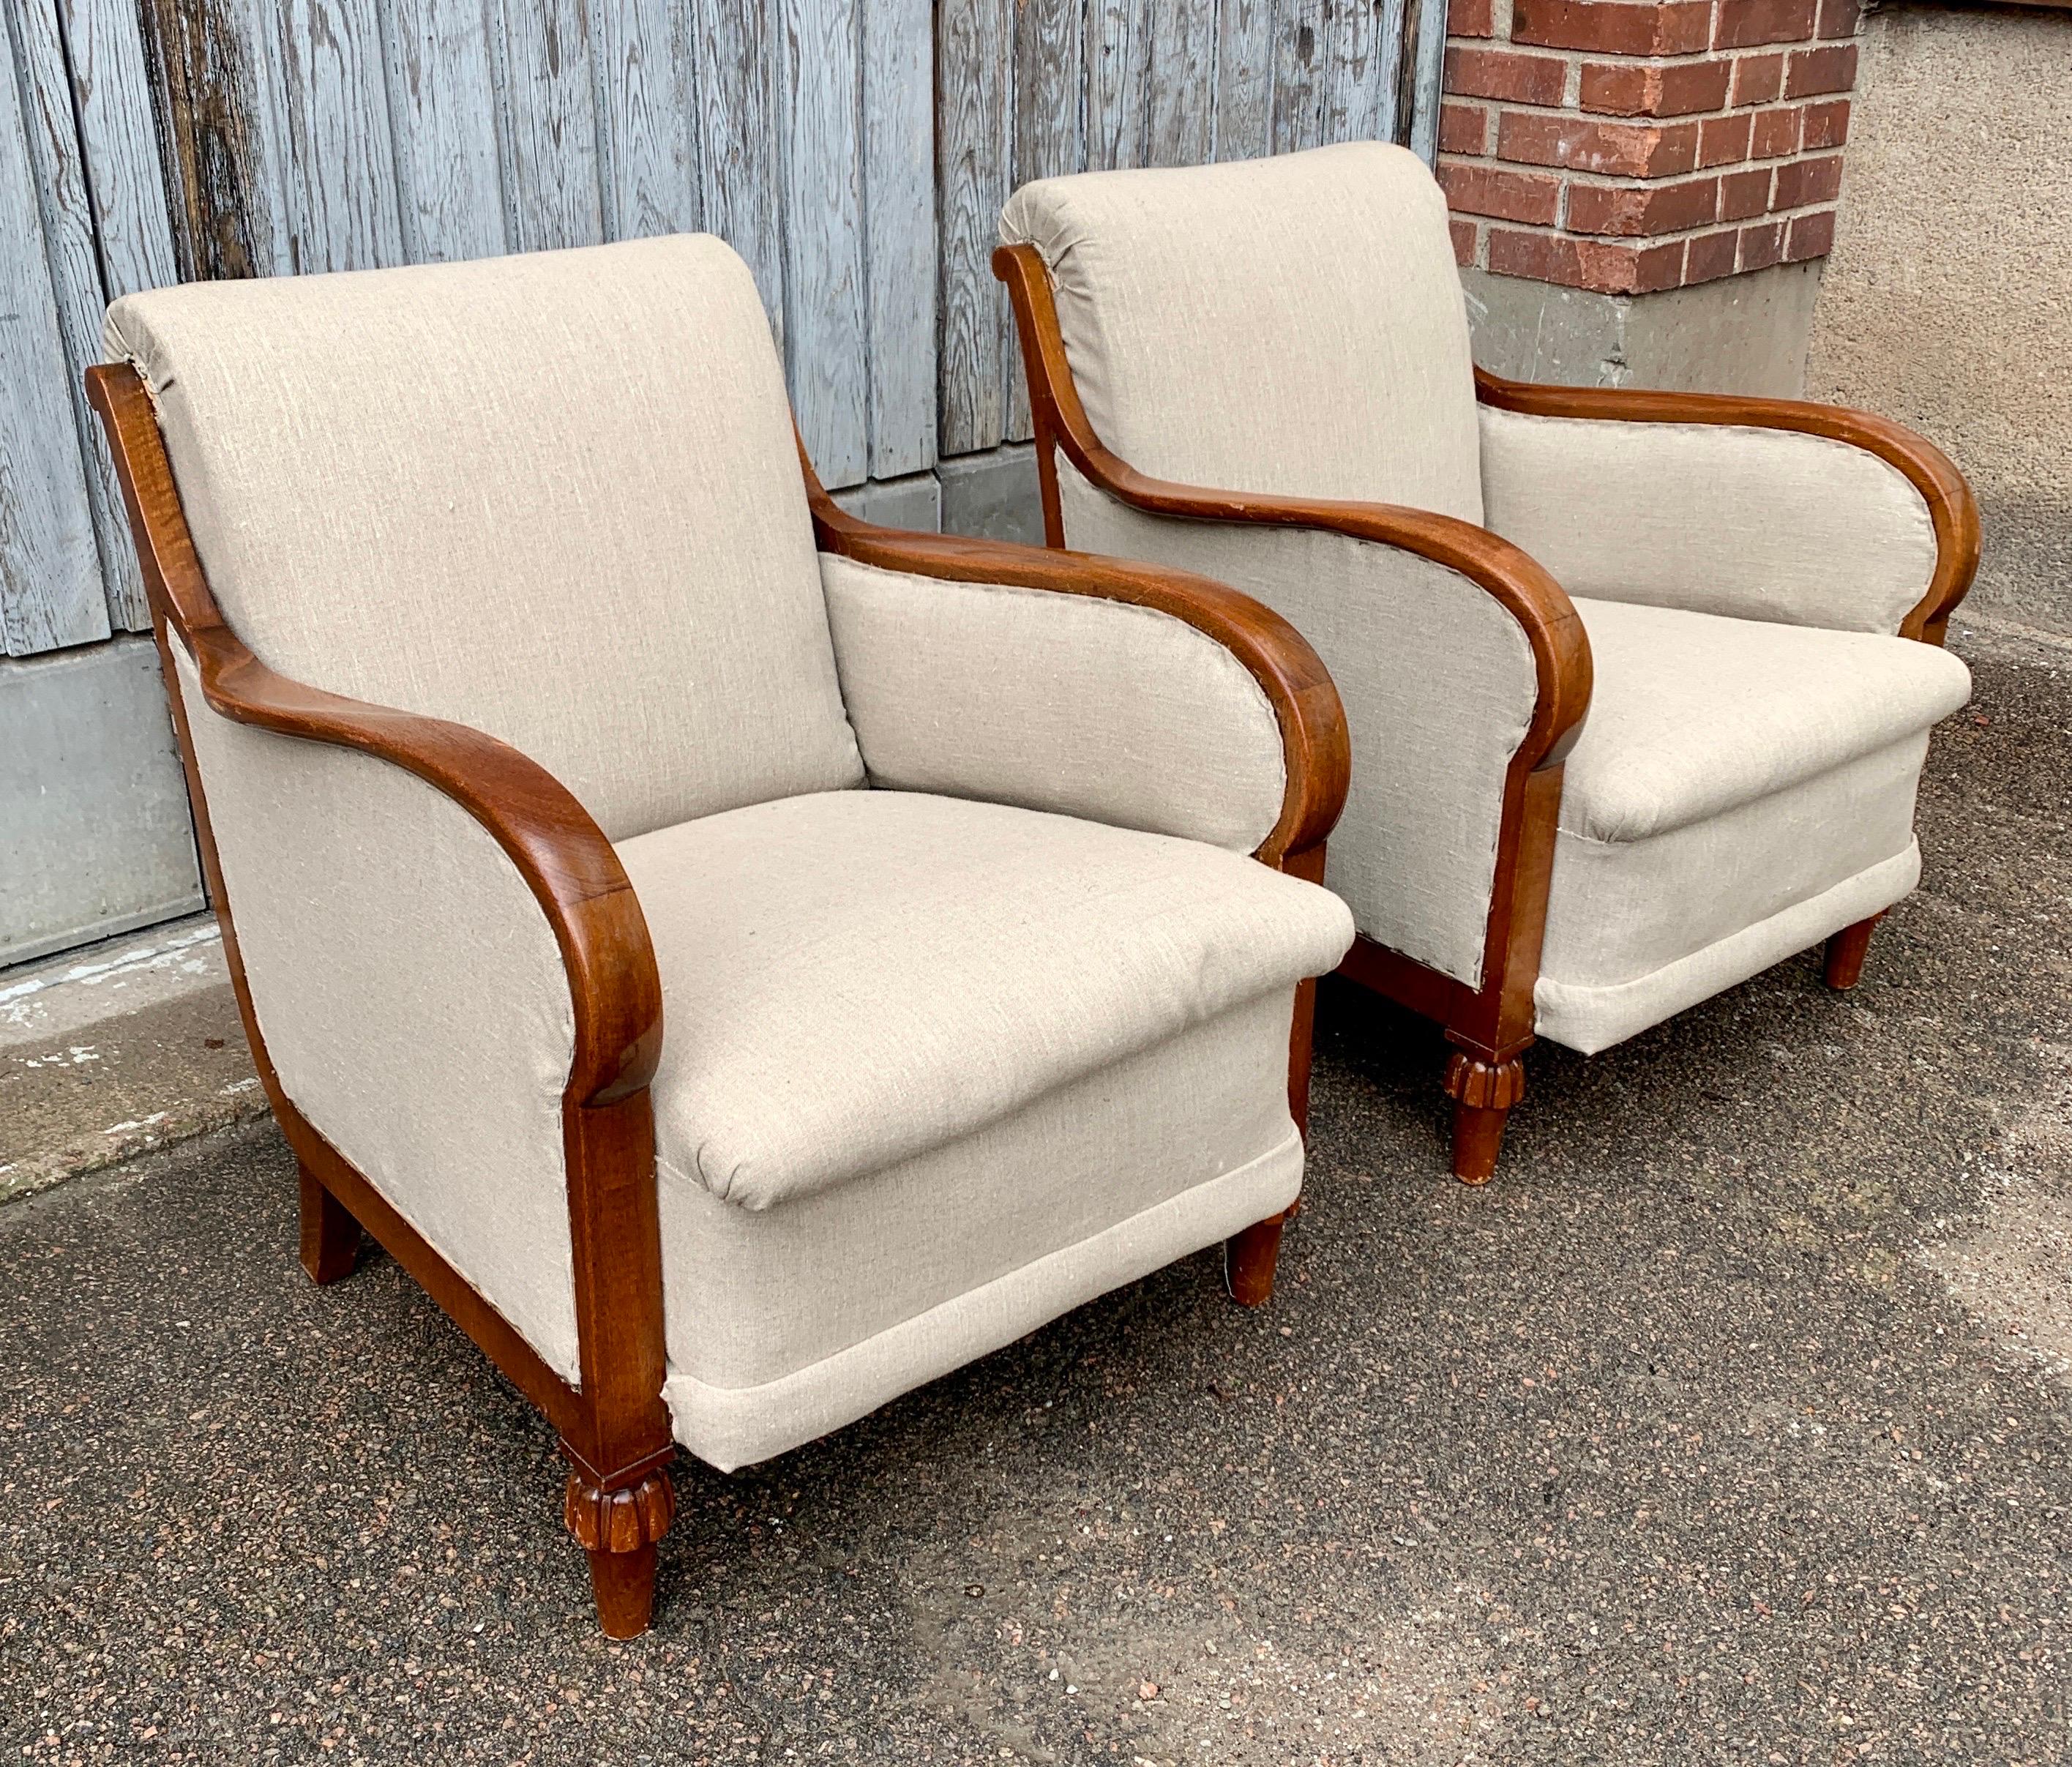 Pair of Large Swedish 19th Cantury Oak Armchairs in Beige Fabric In Good Condition For Sale In Haddonfield, NJ